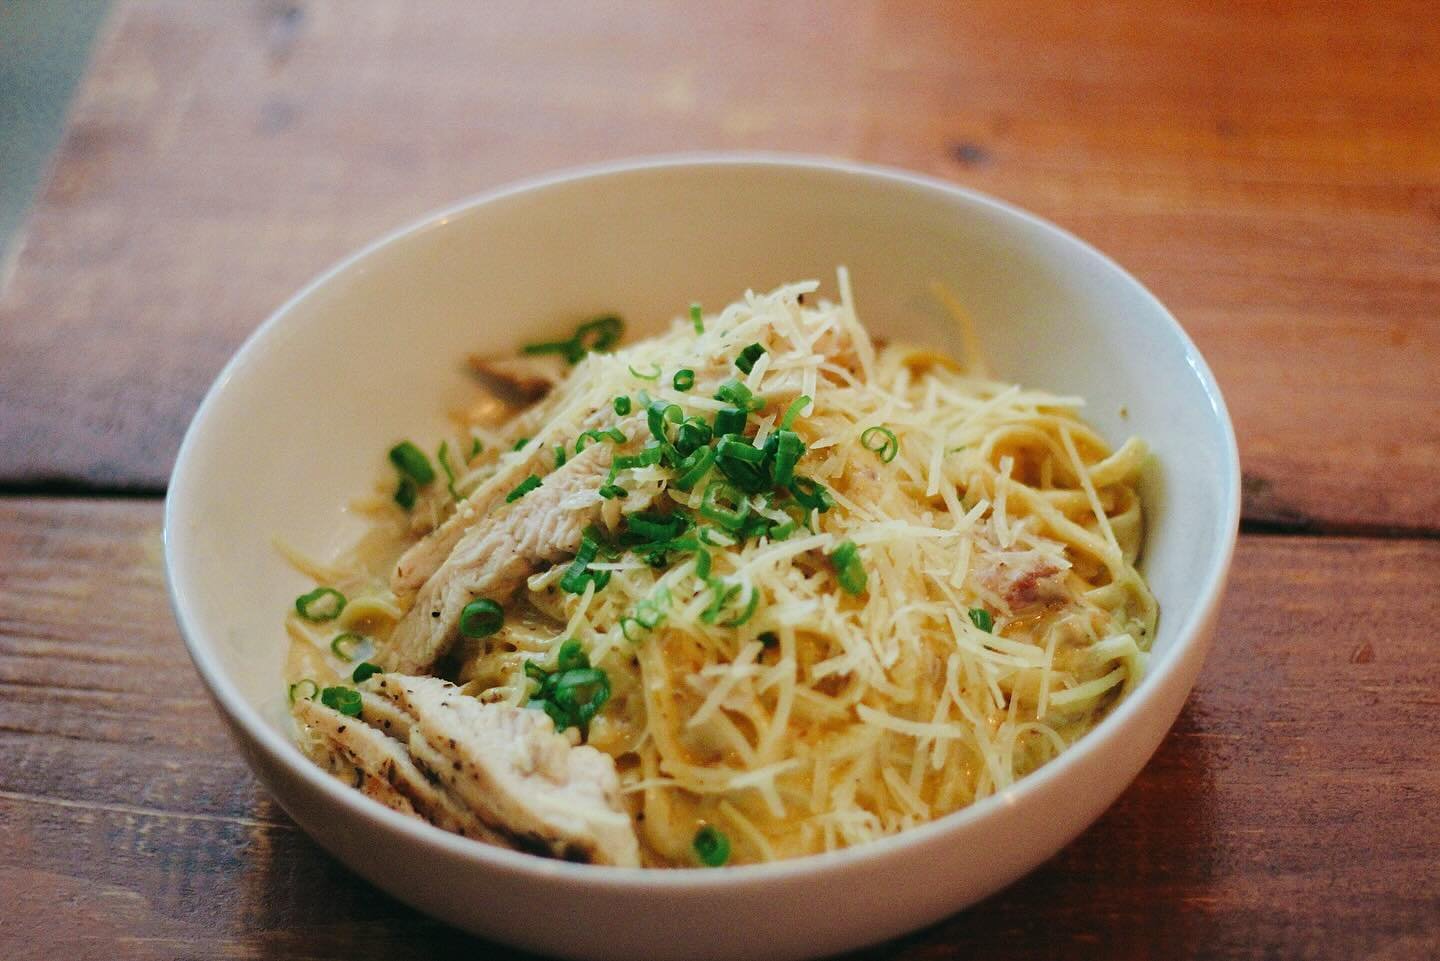 Stop In &amp; Enjoy Our Tasso Pasta Lunch Special! &bull; Your Choice of Chicken or Shrimp over Linguini Pasta tossed in Tasso Cream Sauce and topped with Parmesan Cheese &amp; Green Onions! 🍽️